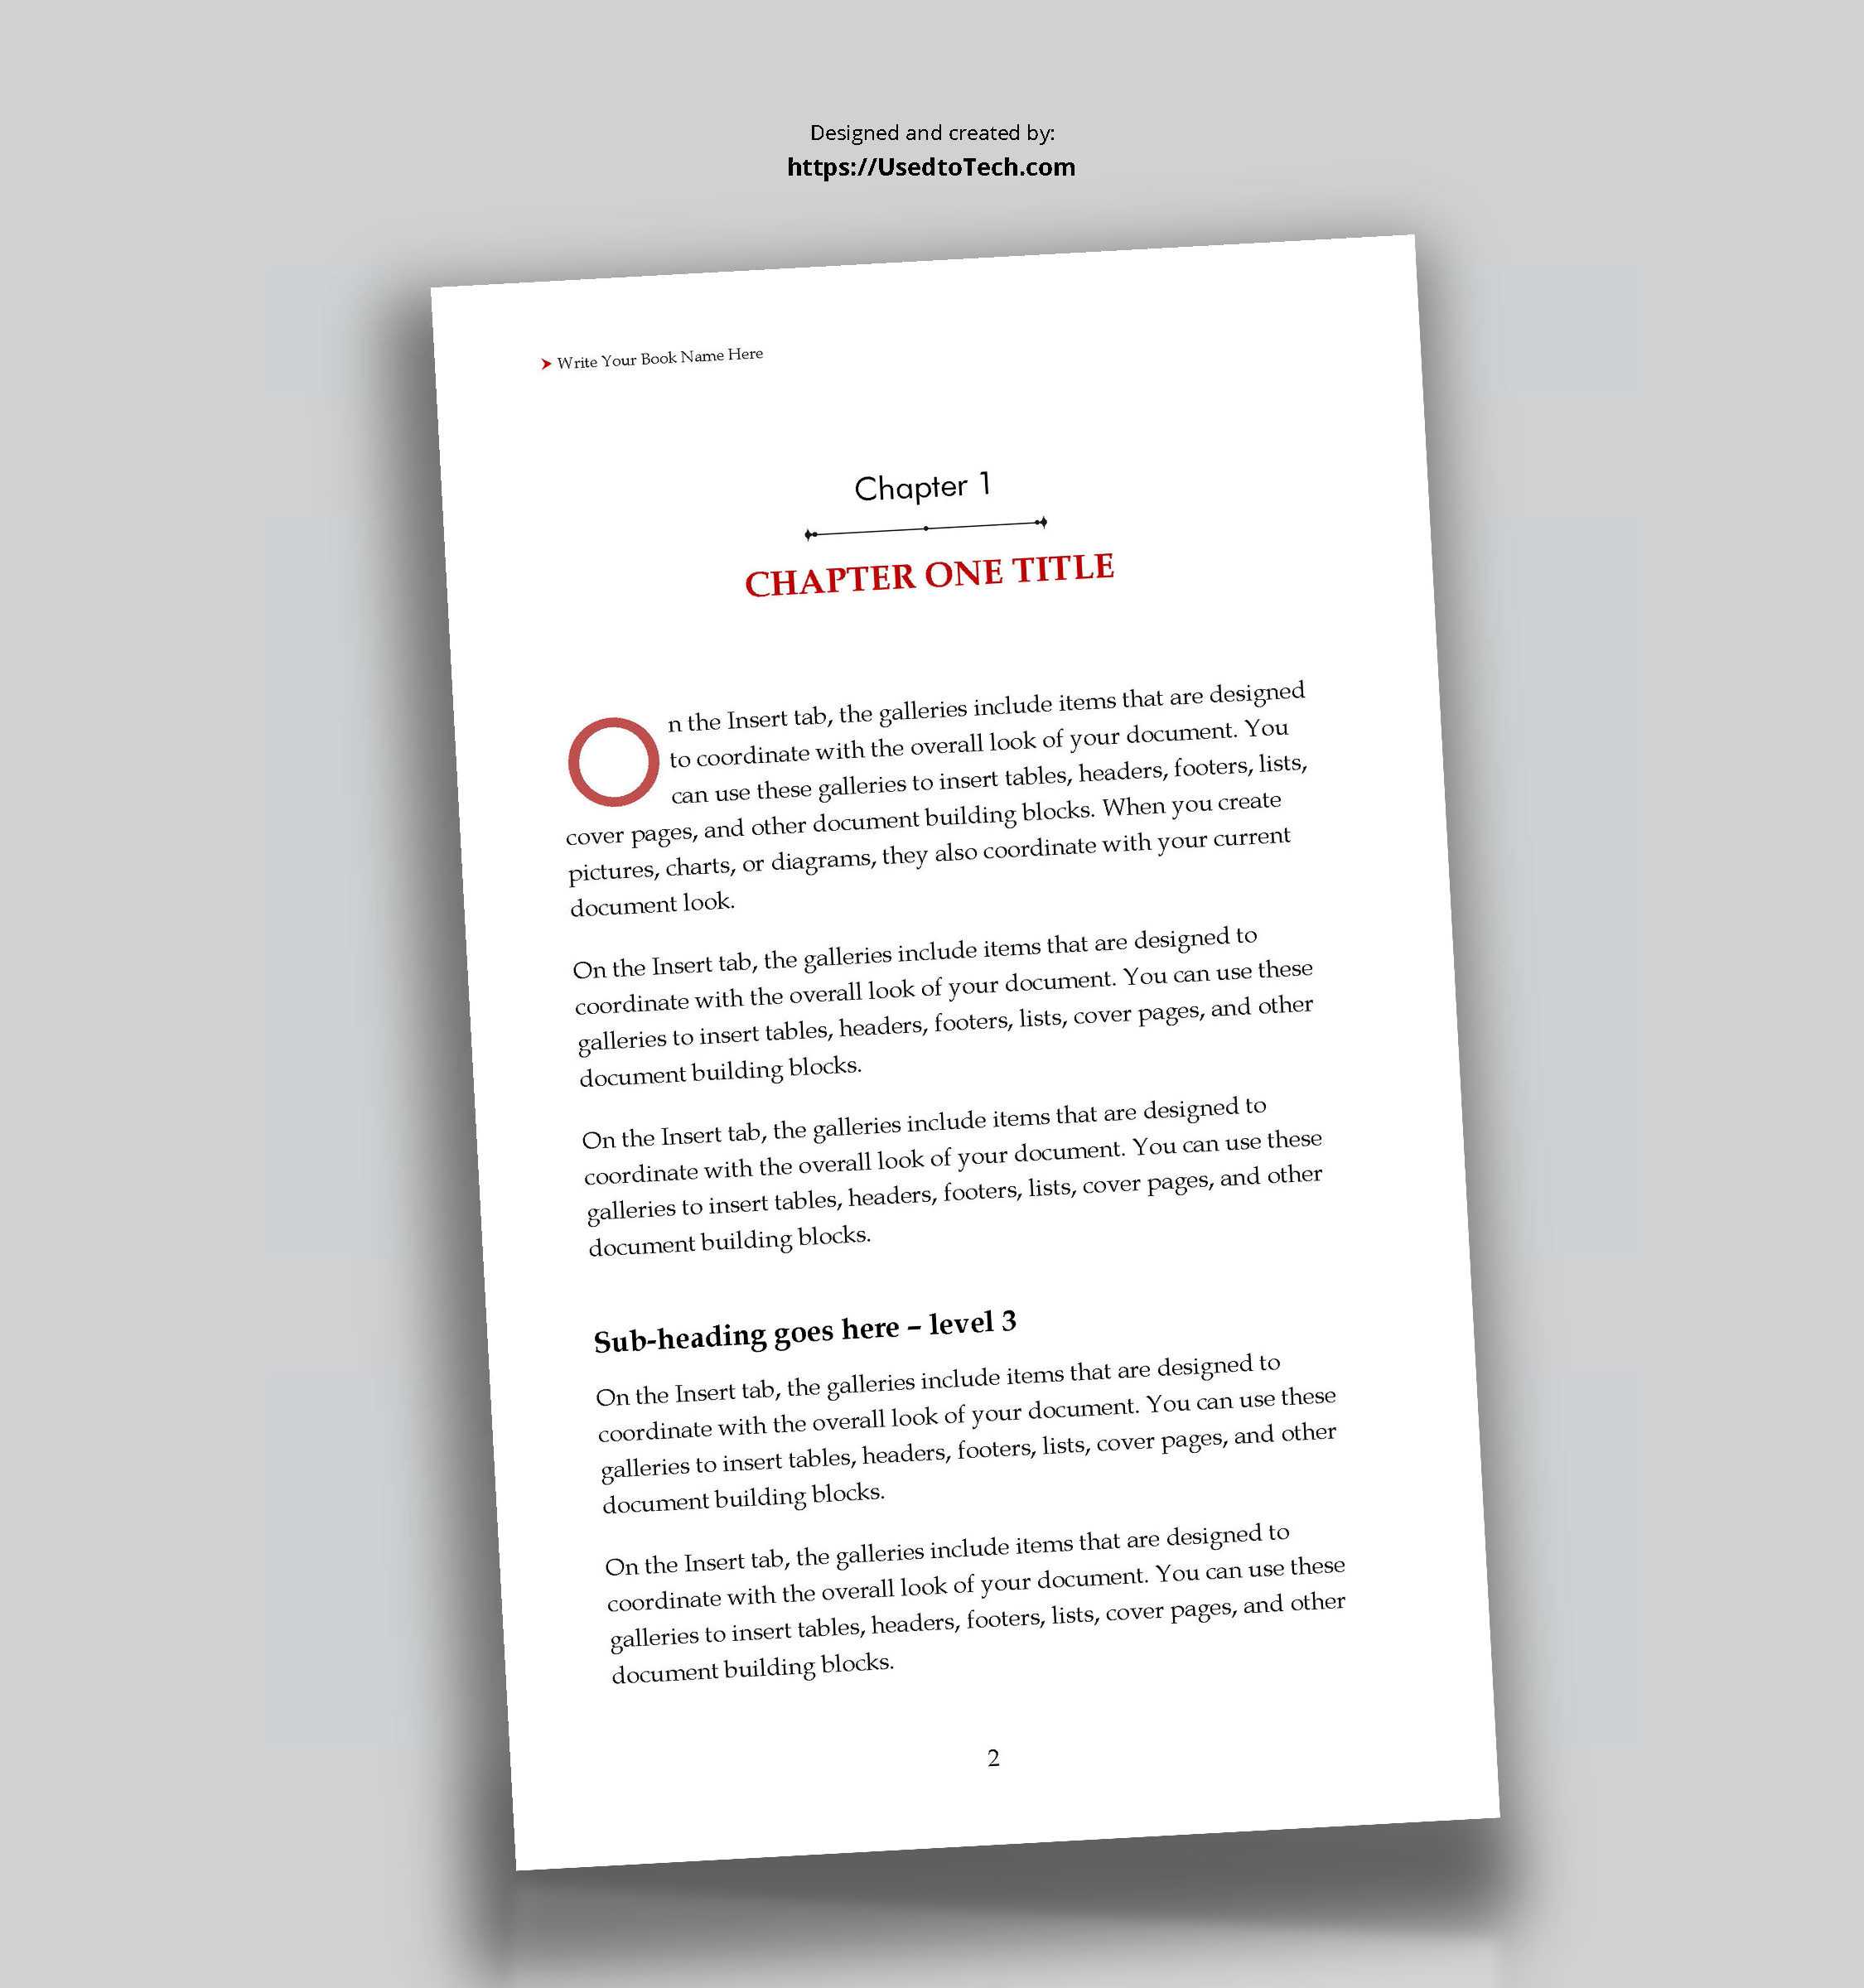 5 X 8 Editable Book Template In Word – Used To Tech Inside How To Create A Book Template In Word